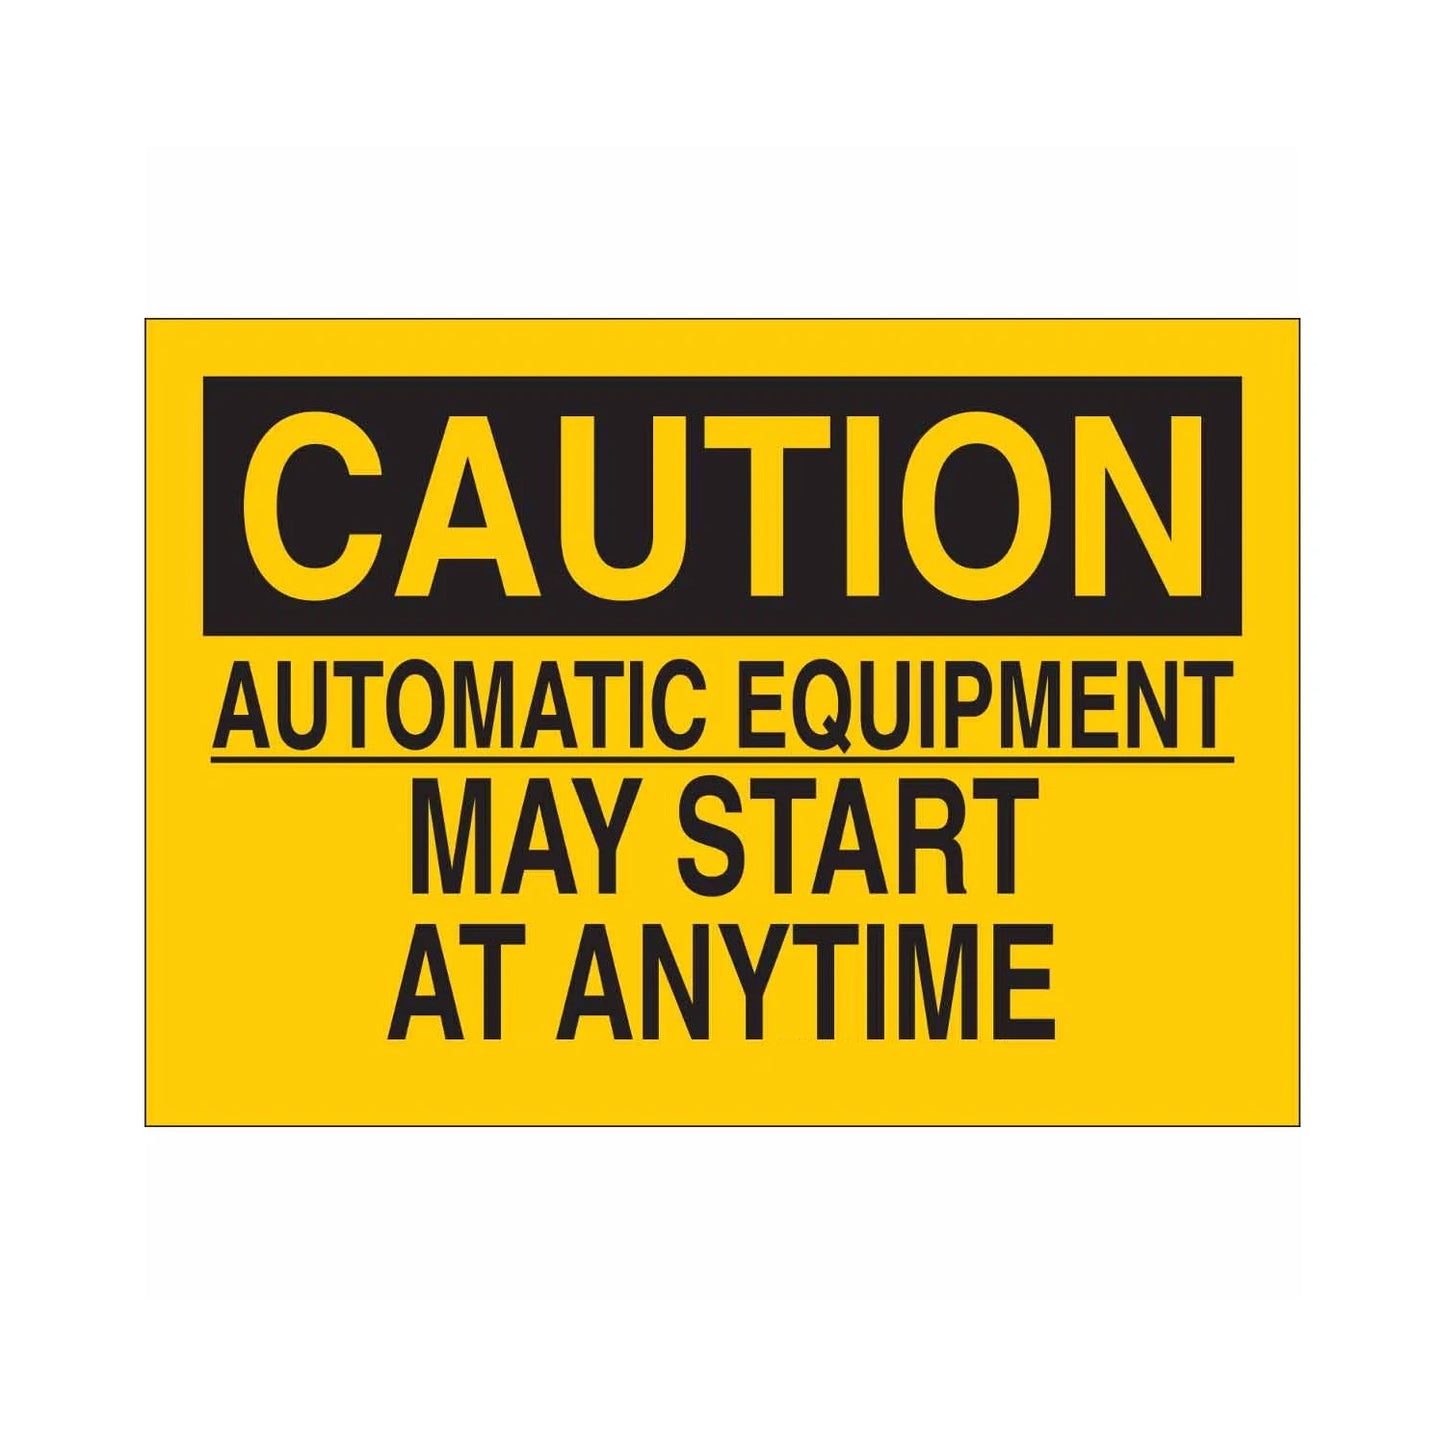 CAUTION Automatic Equipment May Start At Anytime Sign